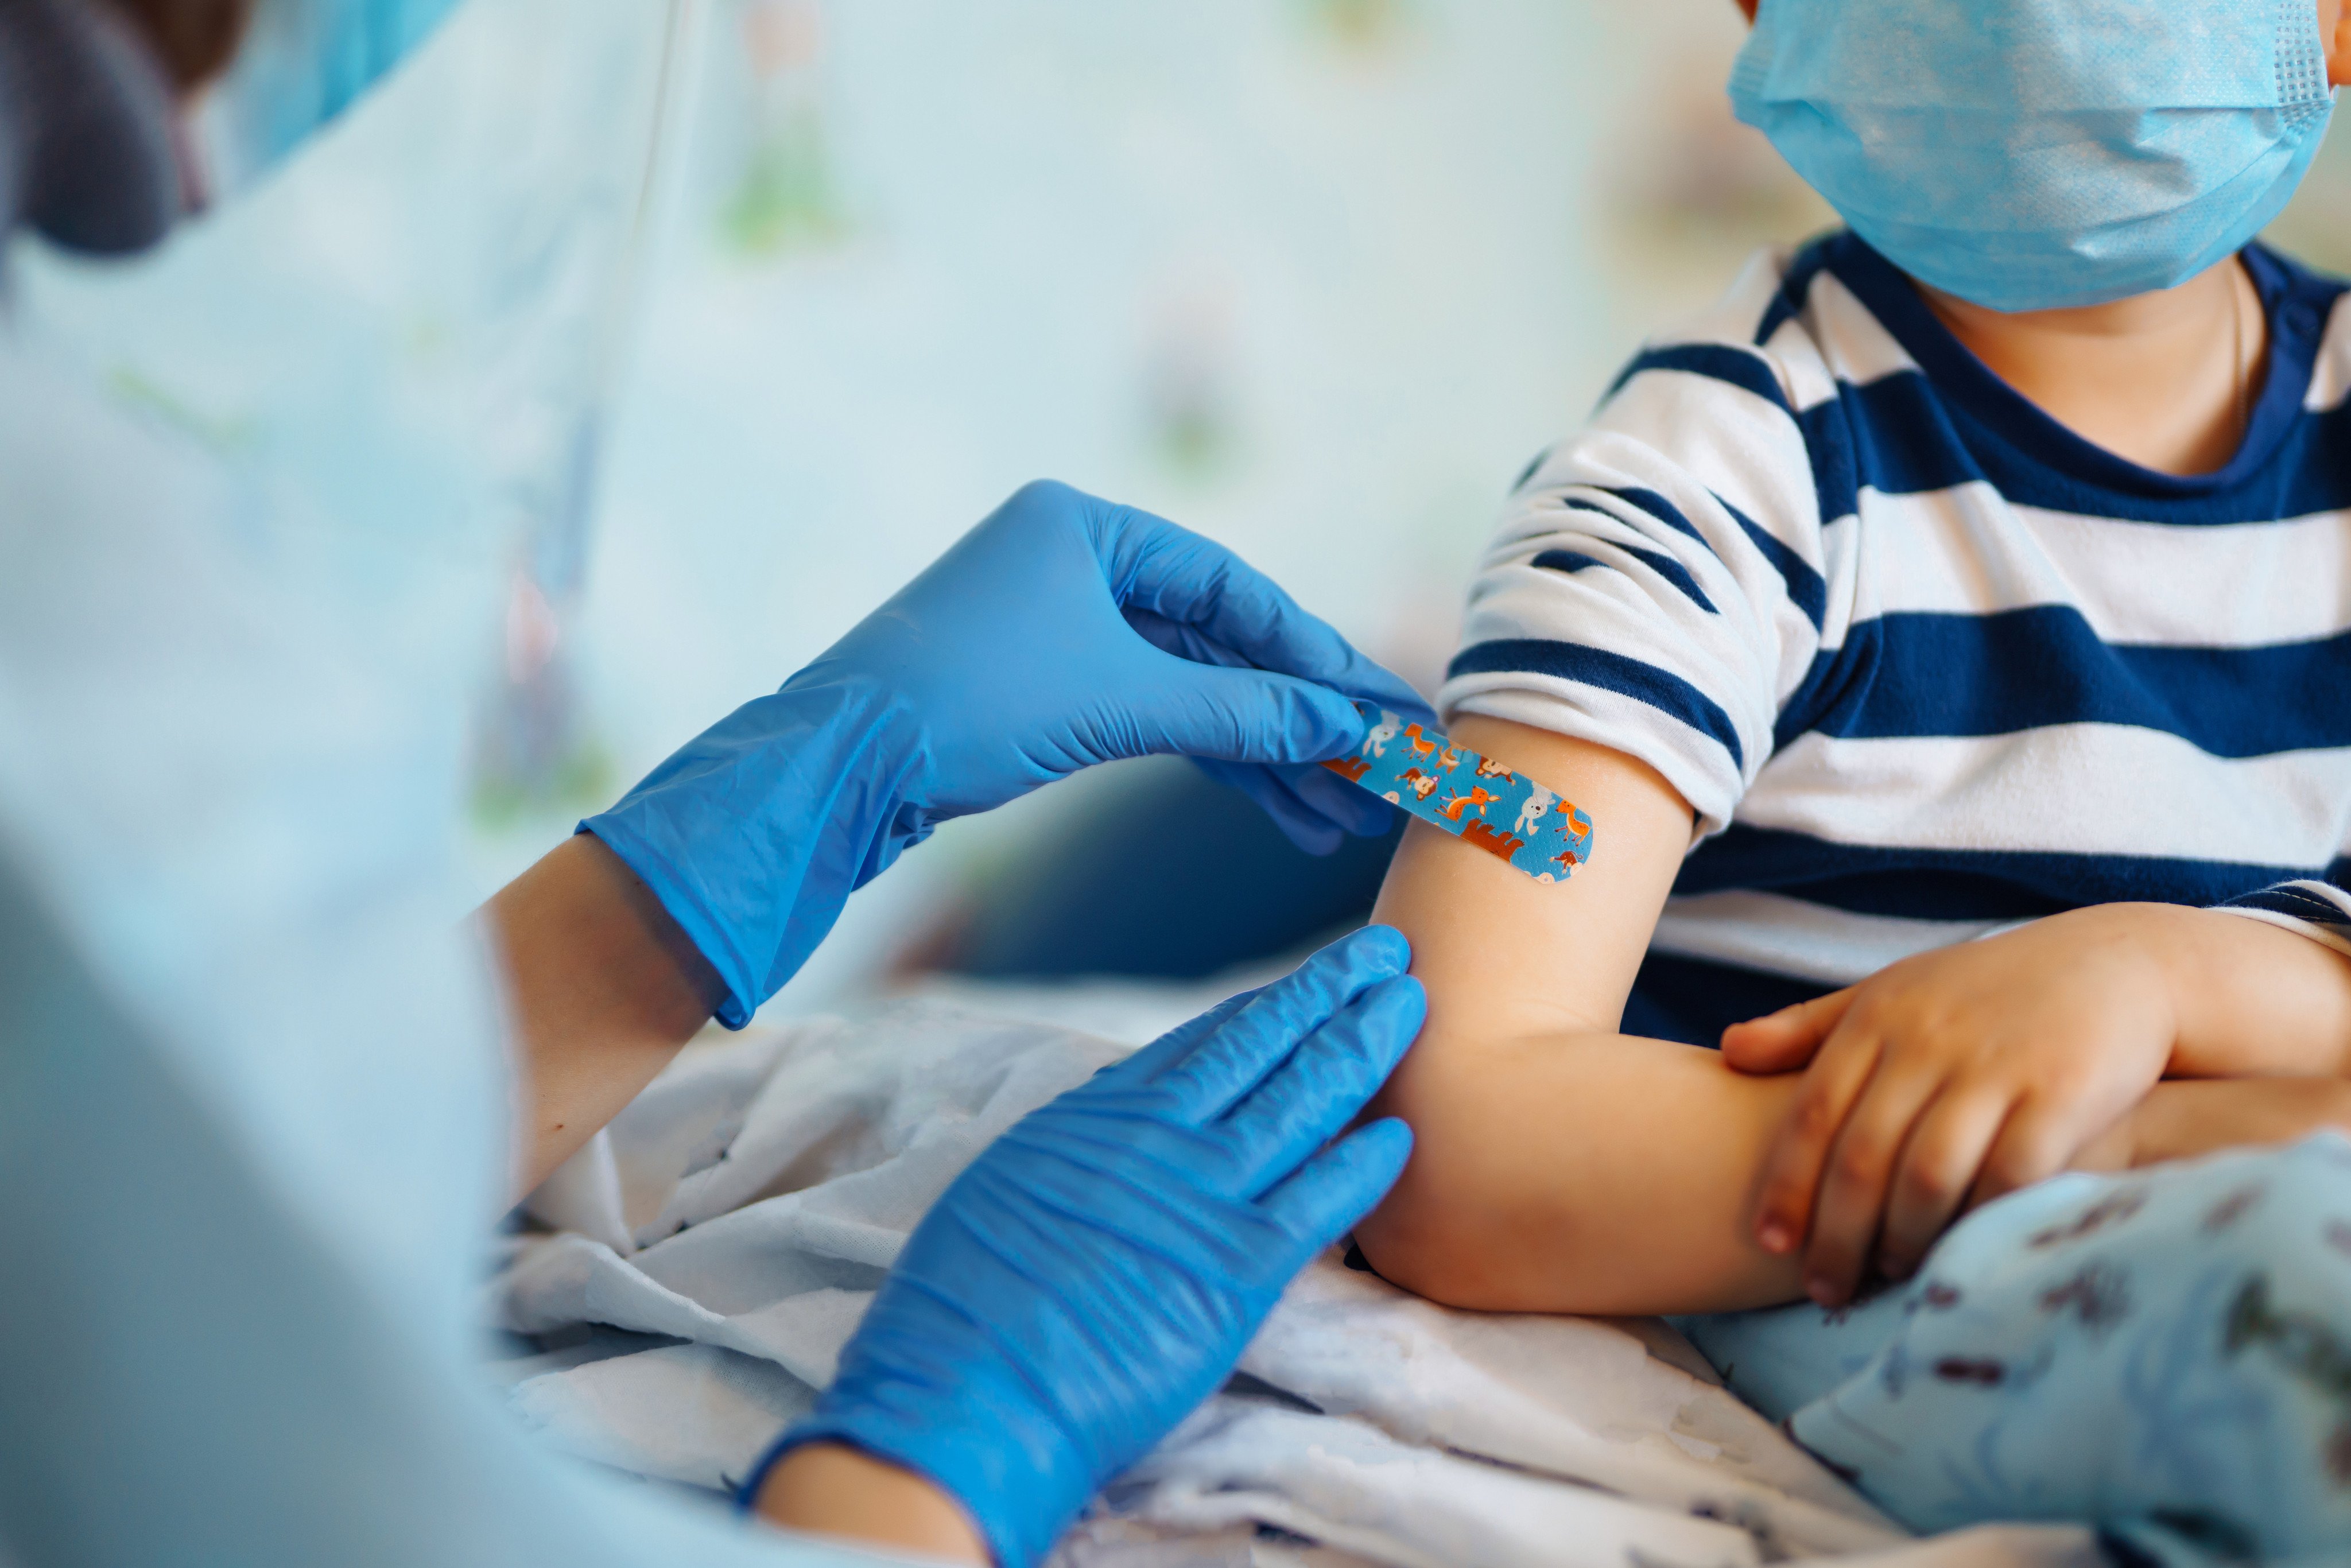 A health adviser has urged parents to get their children vaccinated against the flu. Photo: Shutterstock